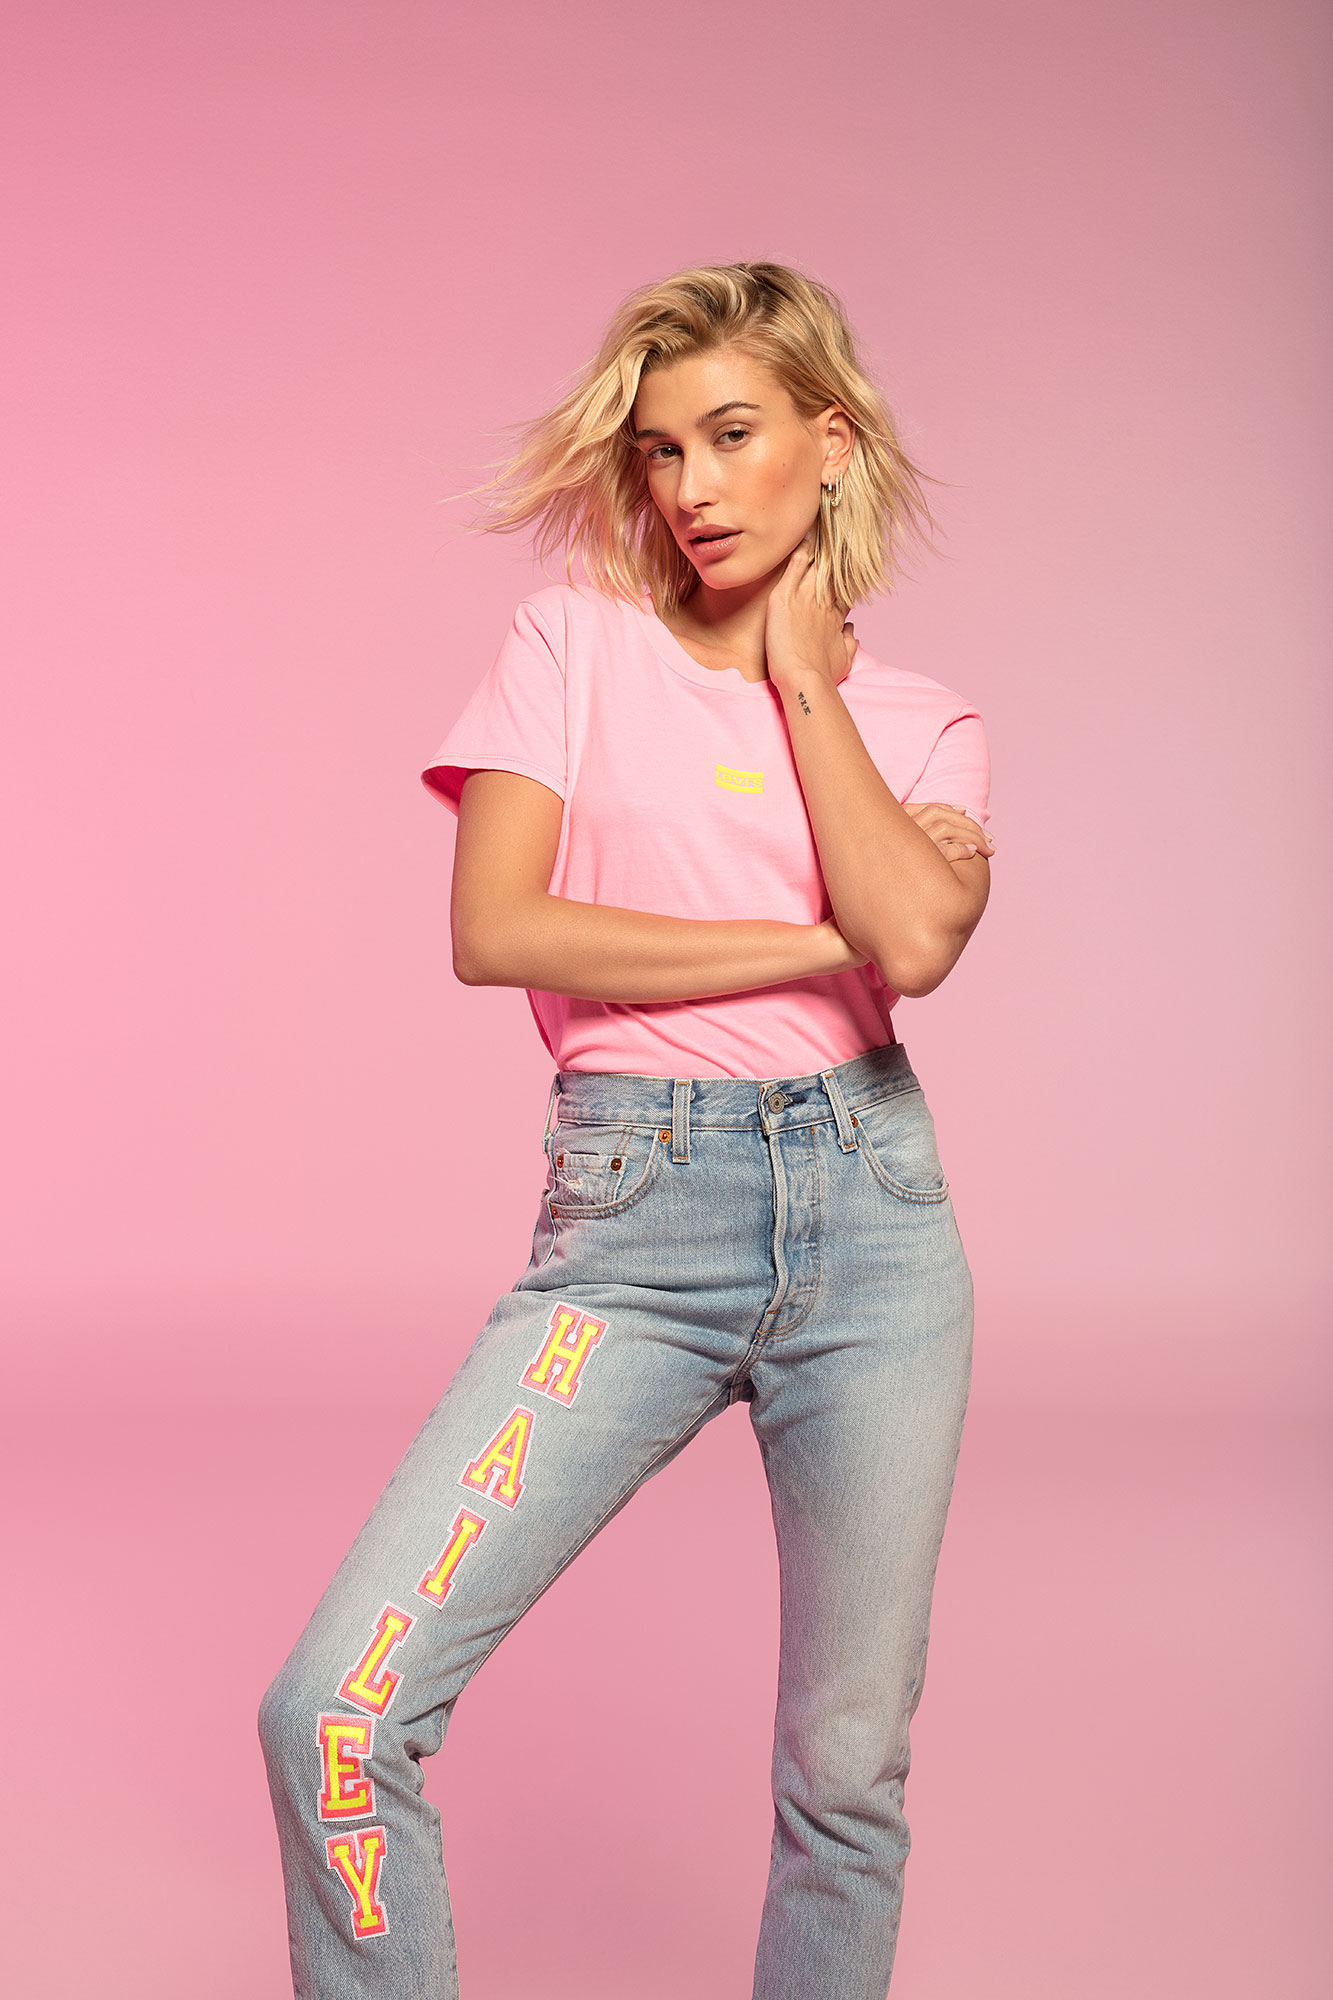 Hailey Baldwin Is the First Face of Levi's 501s: Details